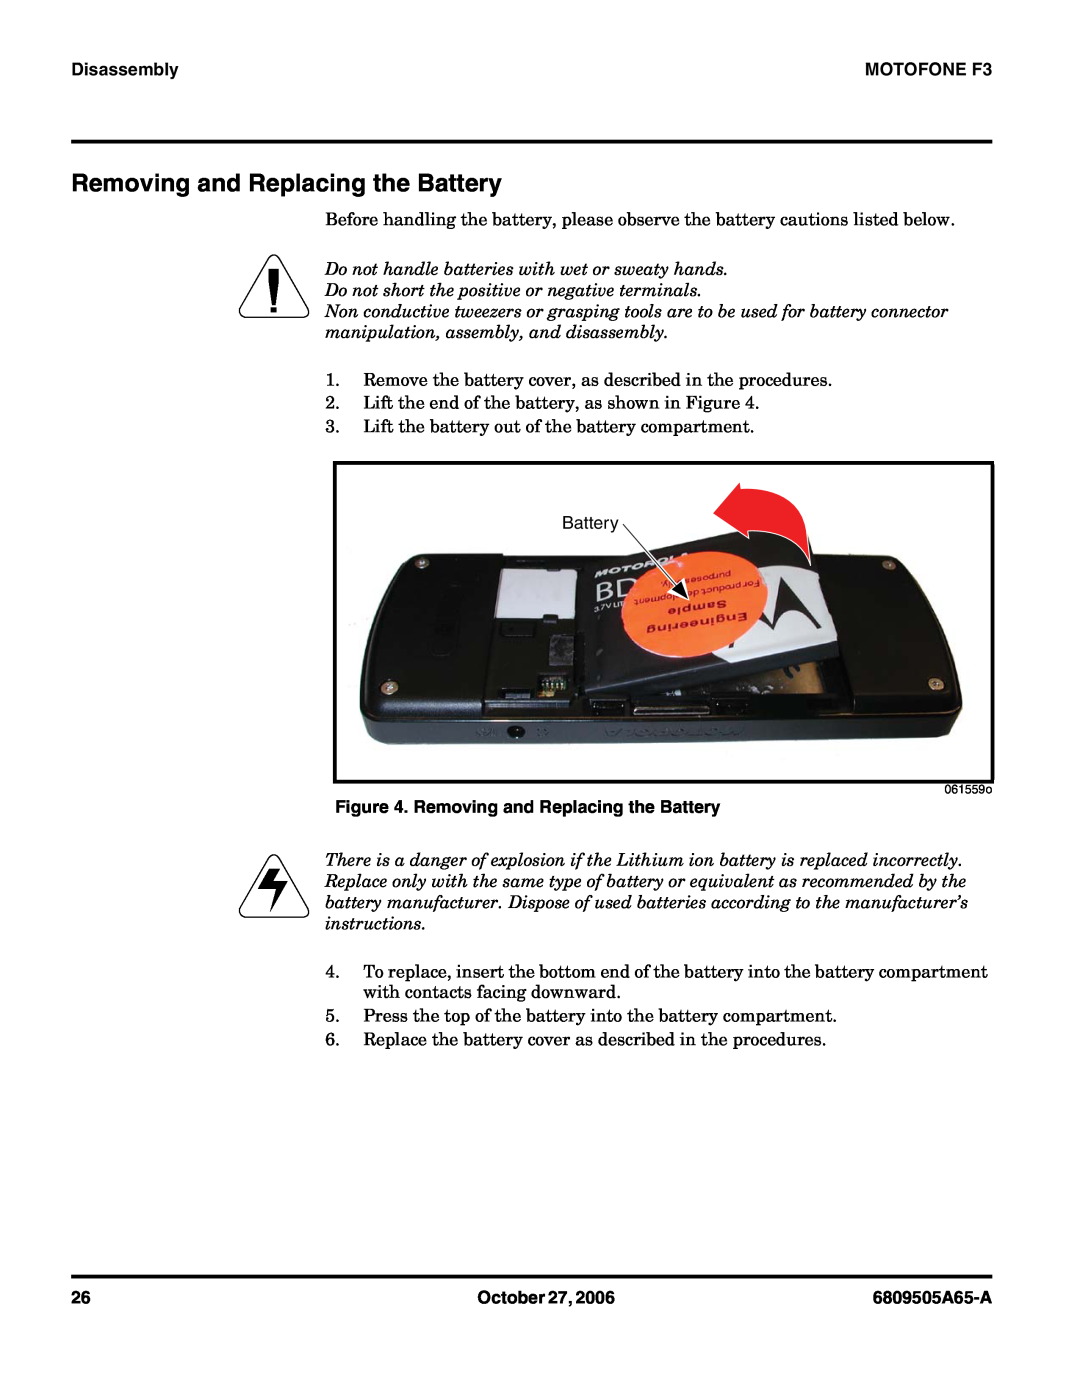 Motorola service manual Removing and Replacing the Battery, Disassembly, MOTOFONE F3, October 27, 6809505A65-A 